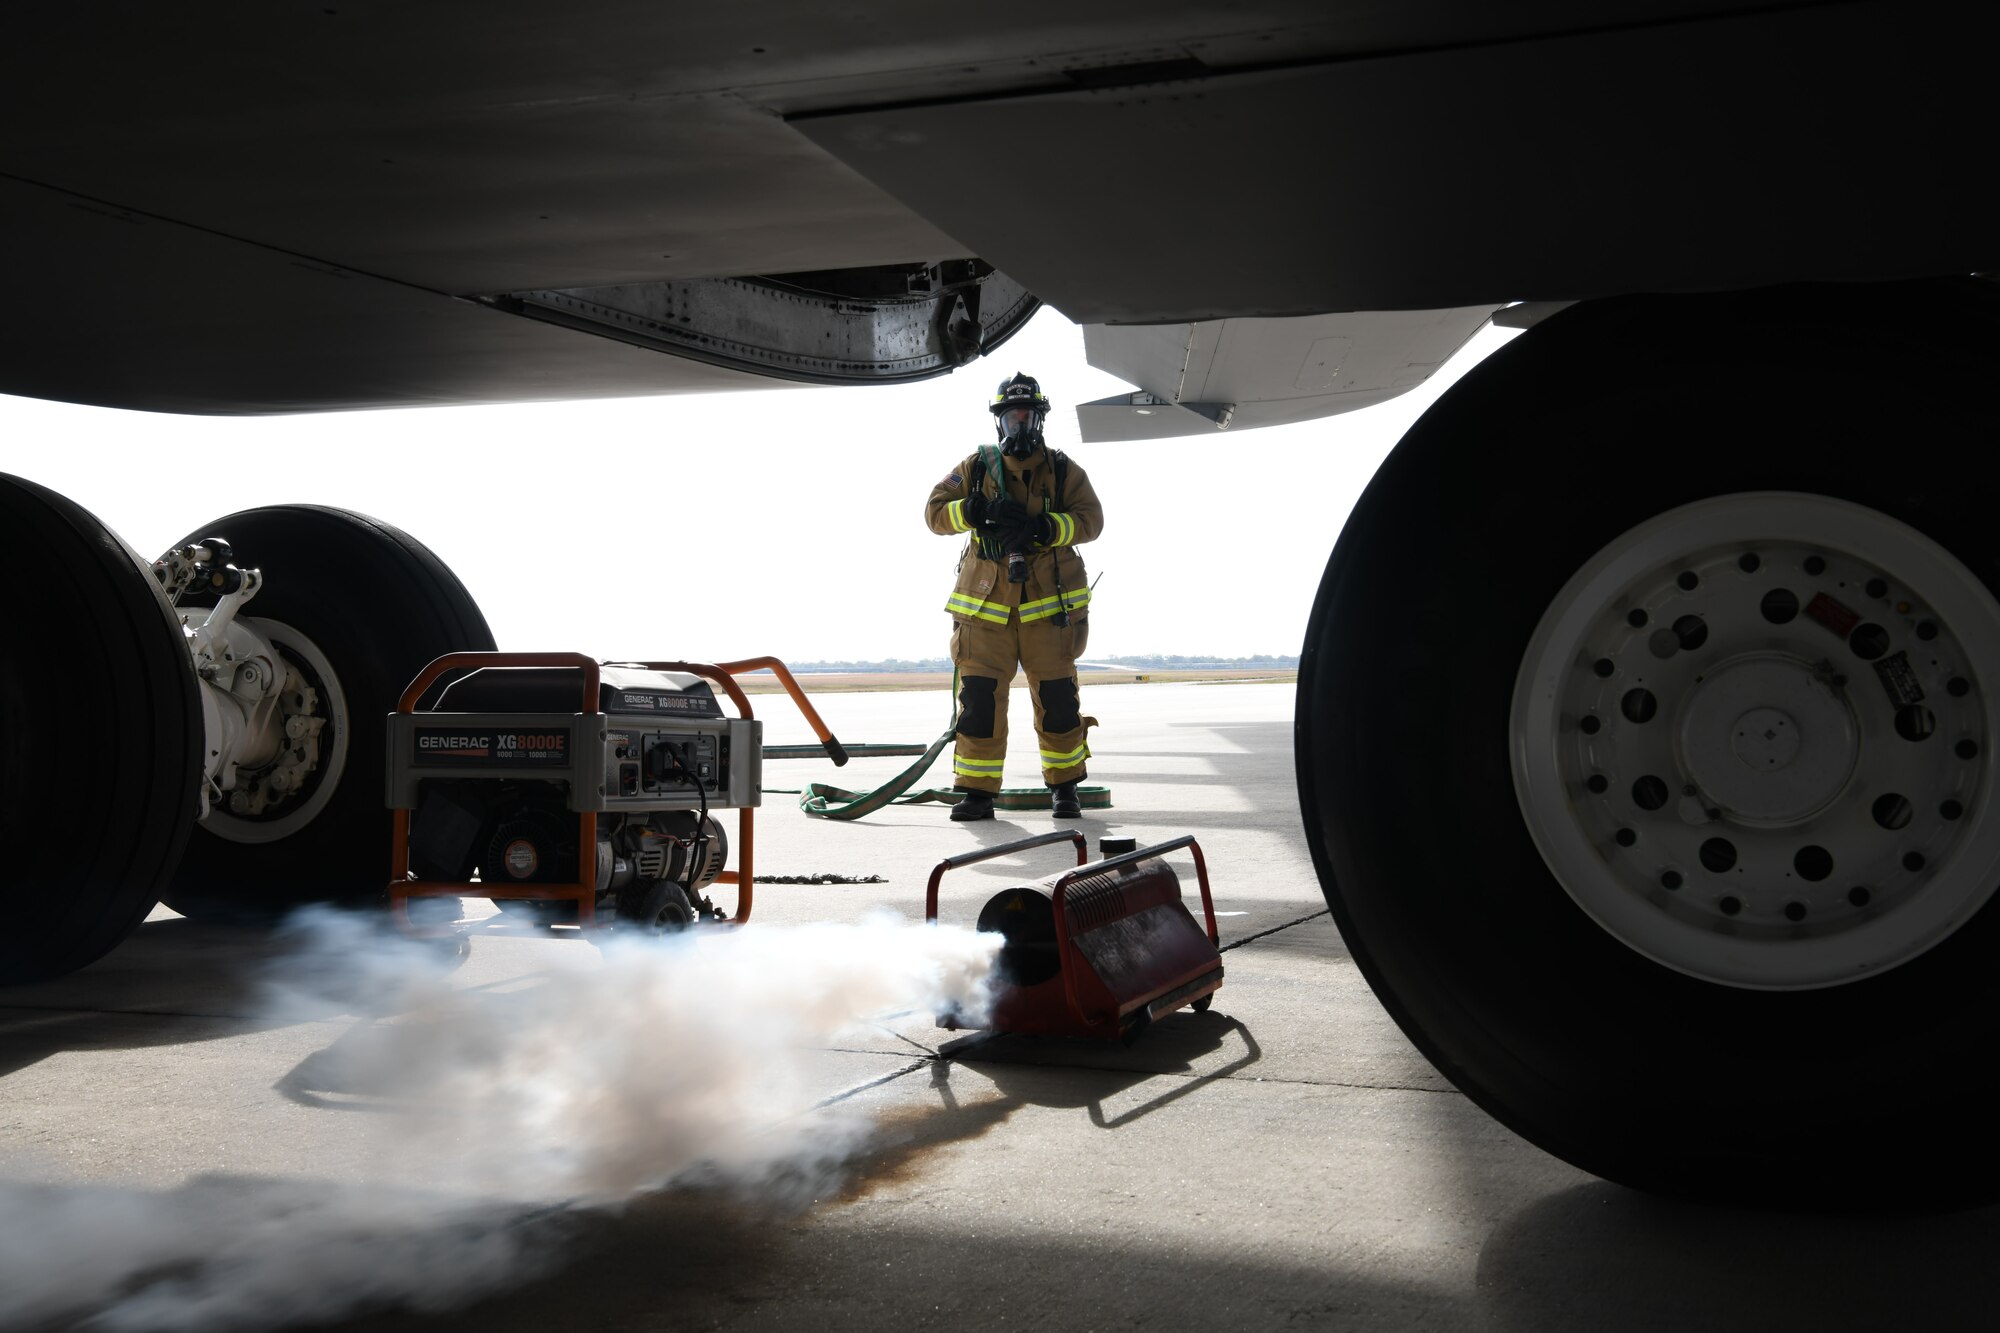 A 902nd Civil Engineer Squadron firefighter, gets into position to fight a simulated brake fire on a C-5M Super Galaxy cargo aircraft during a total force exercise Nov. 15, 2021, at Joint Base San Antonio-Lackland, Texas. A smoke machine was used to create a more realistic environment during the training scenario. (U.S. Air Force photo by Master Sgt. Kristian Carter)